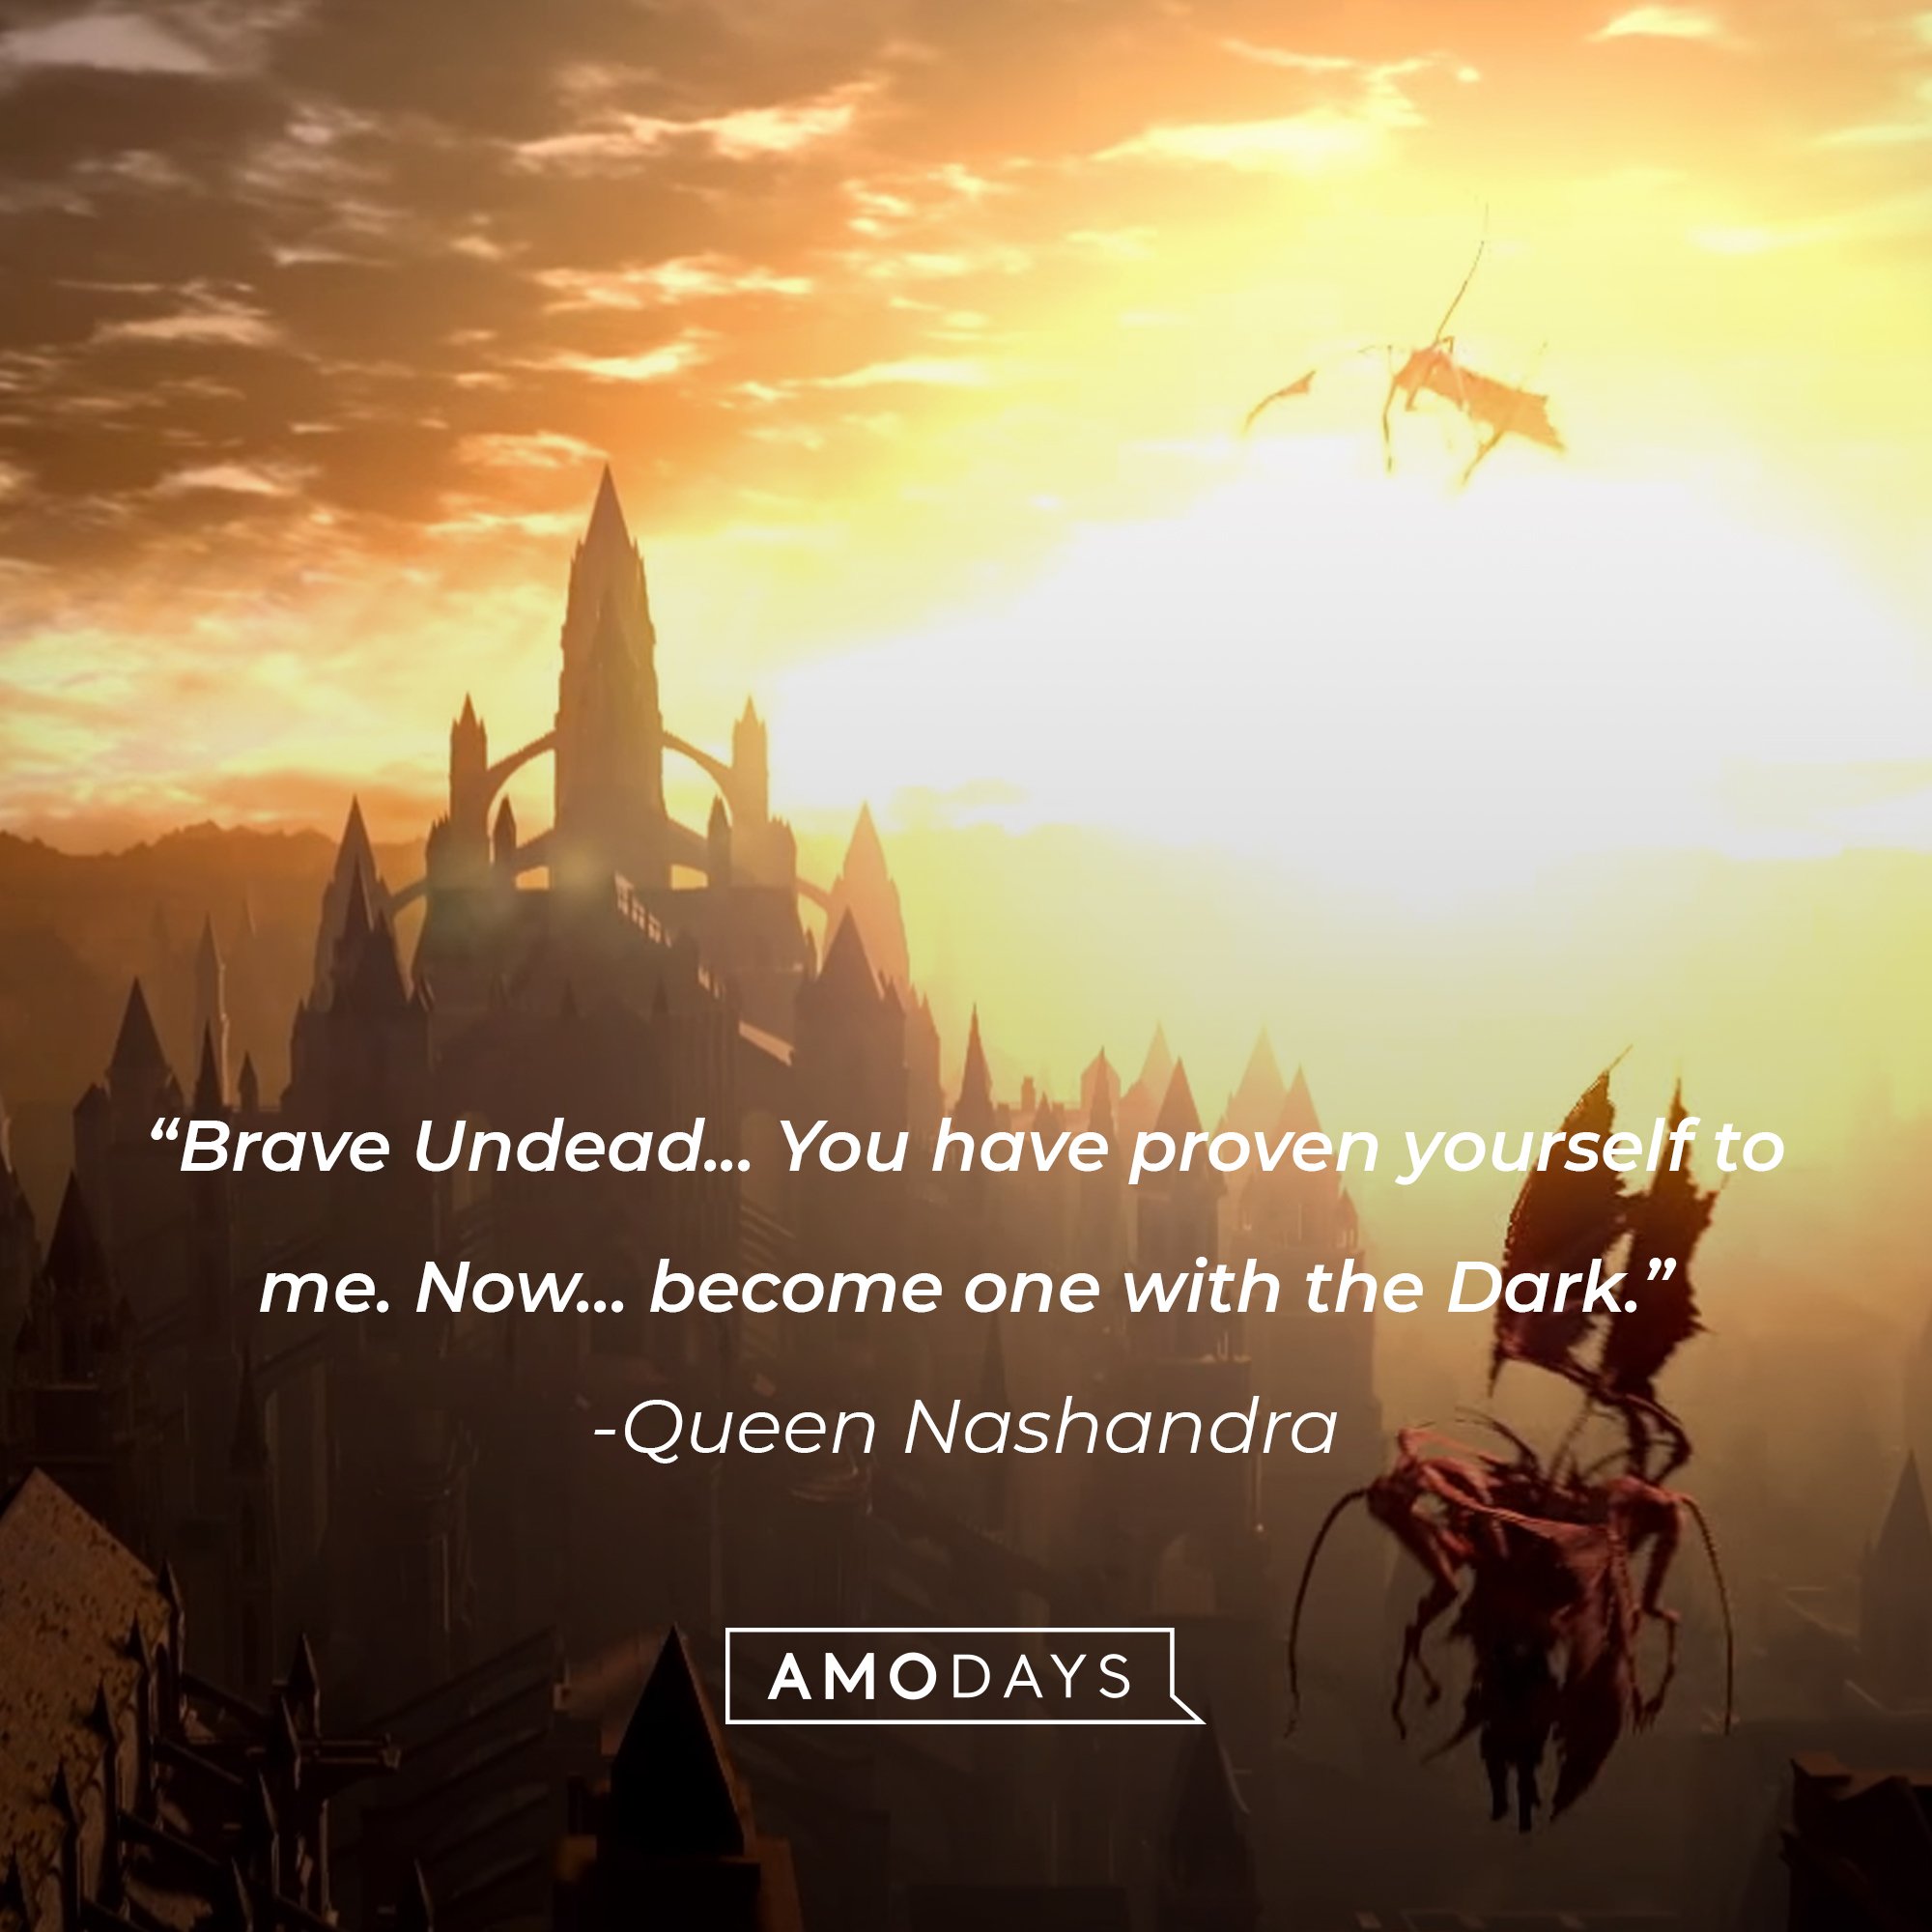 Queen Nashandra’s quote: "Brave Undead... you have proven yourself to me. Now... be one with the Dark." | Image: AmoDays